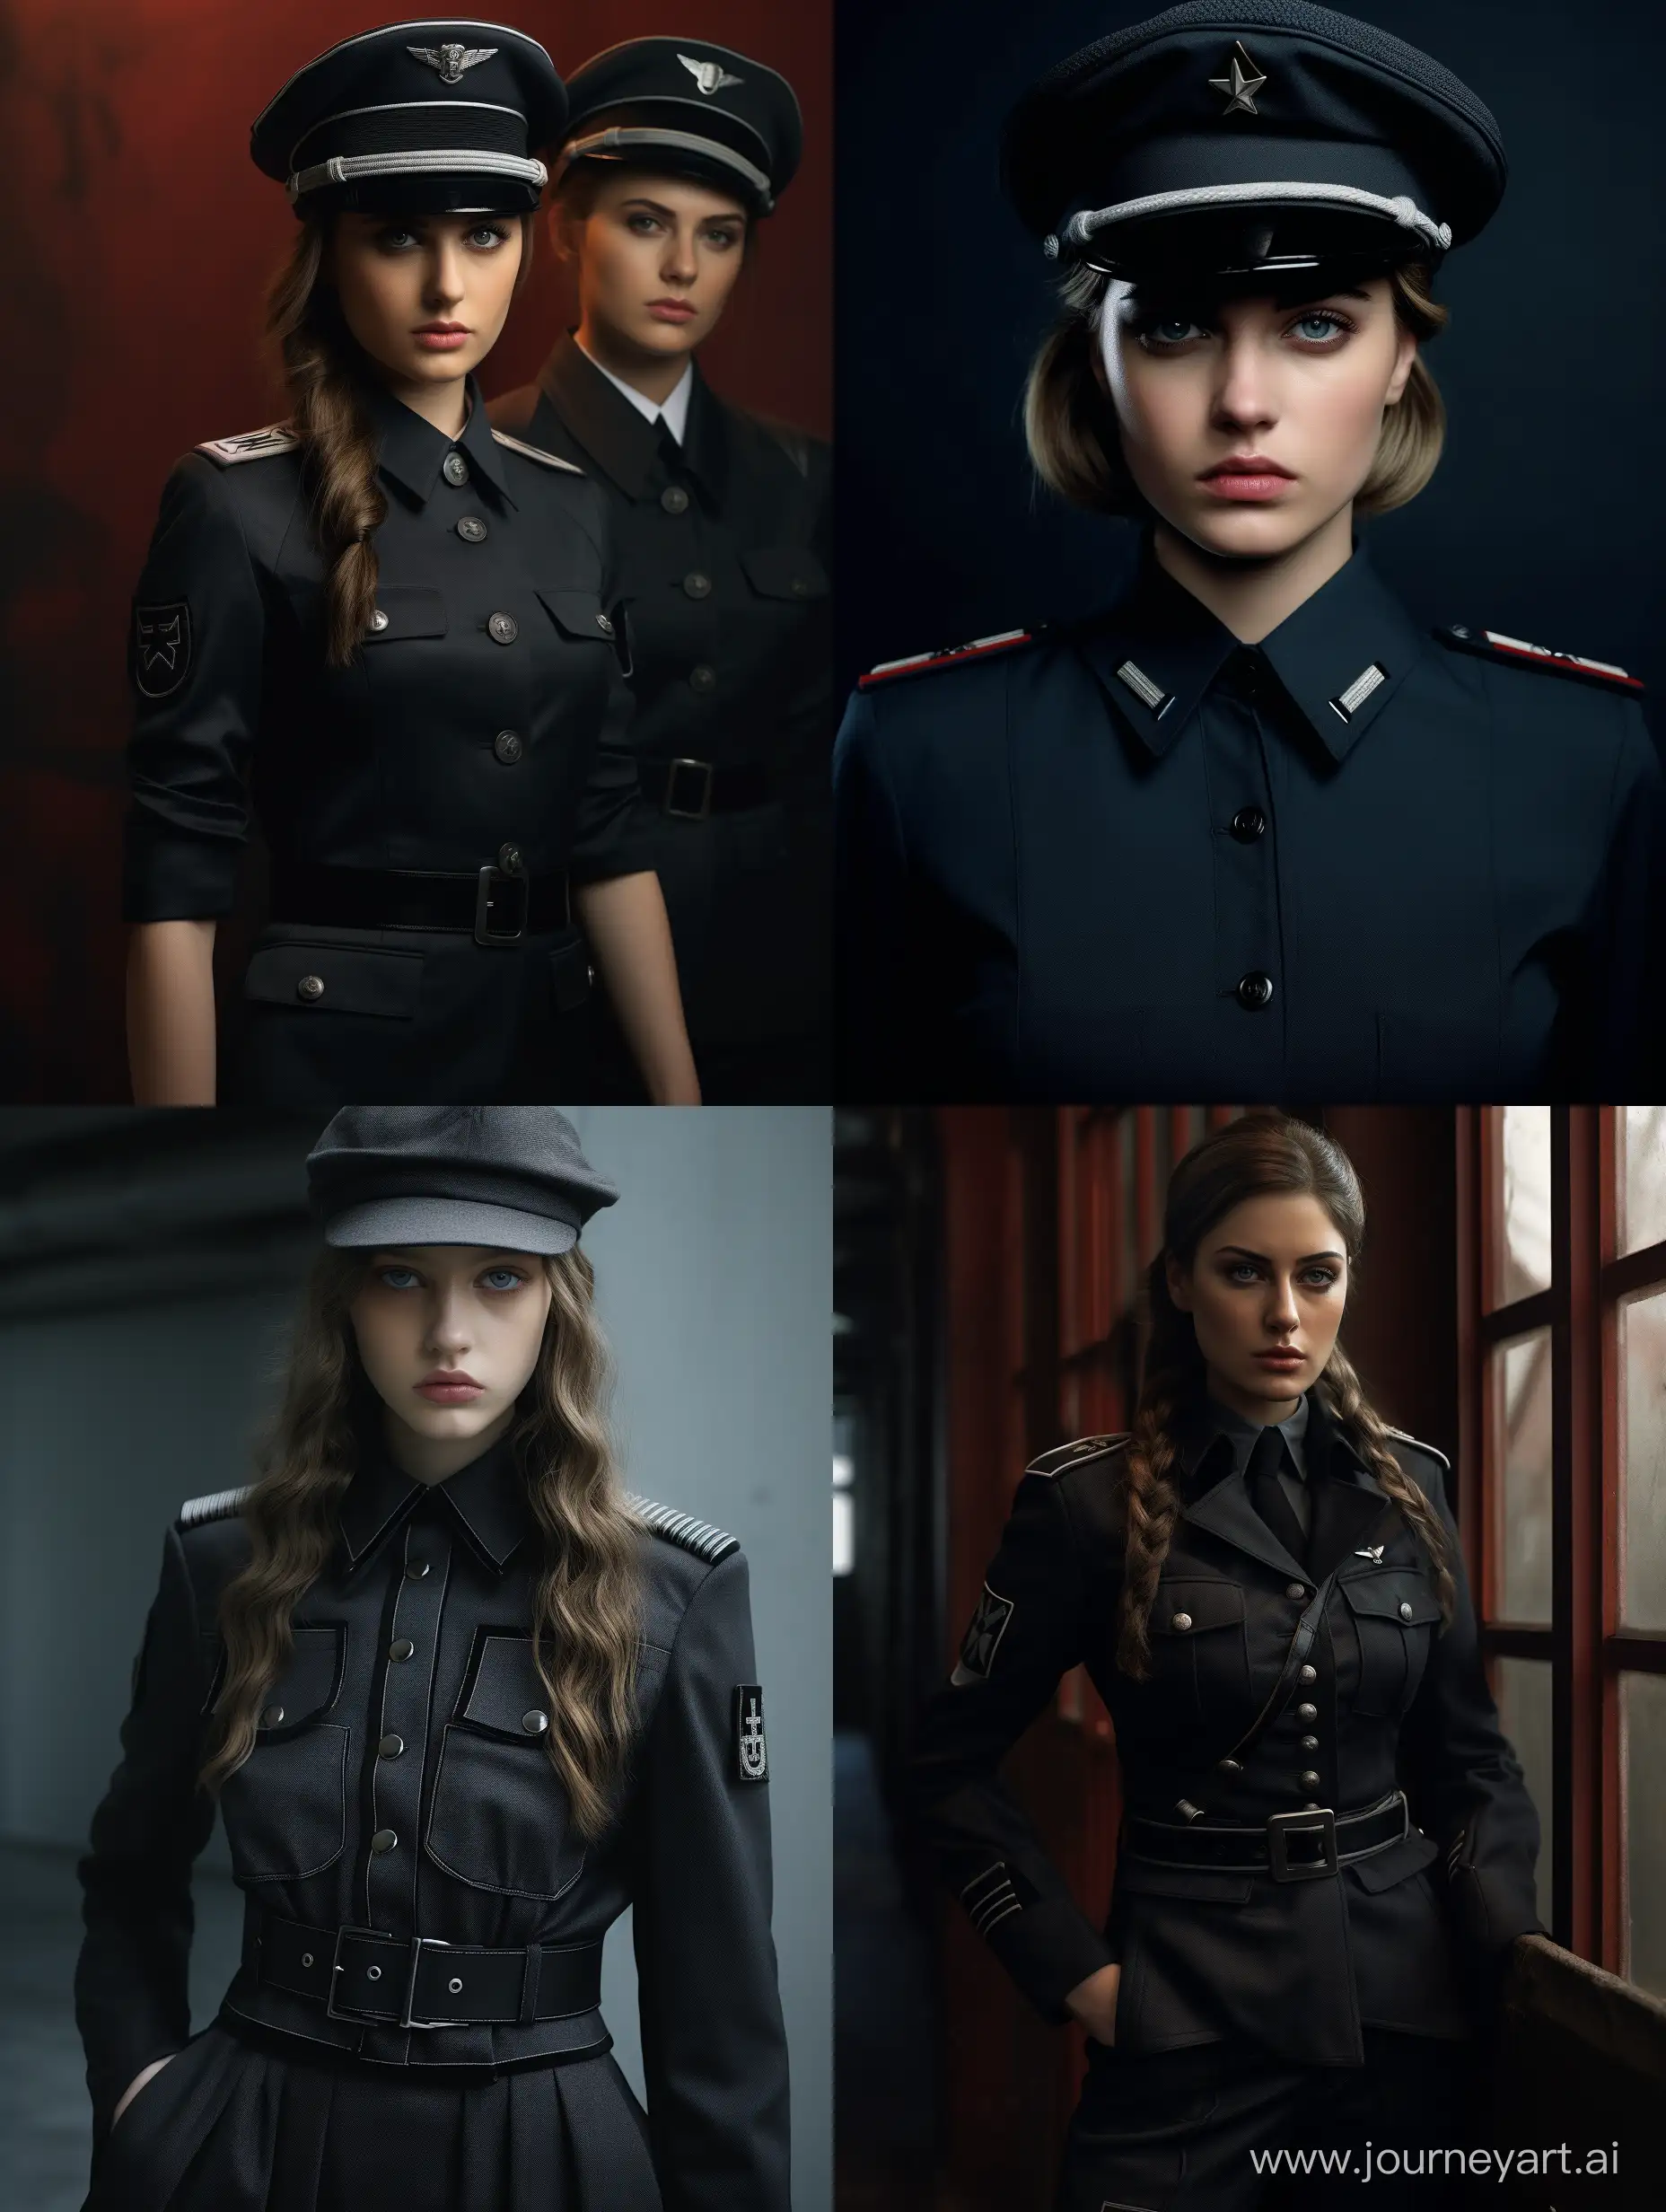 Uniform inspired by the Wehrmacht uniform